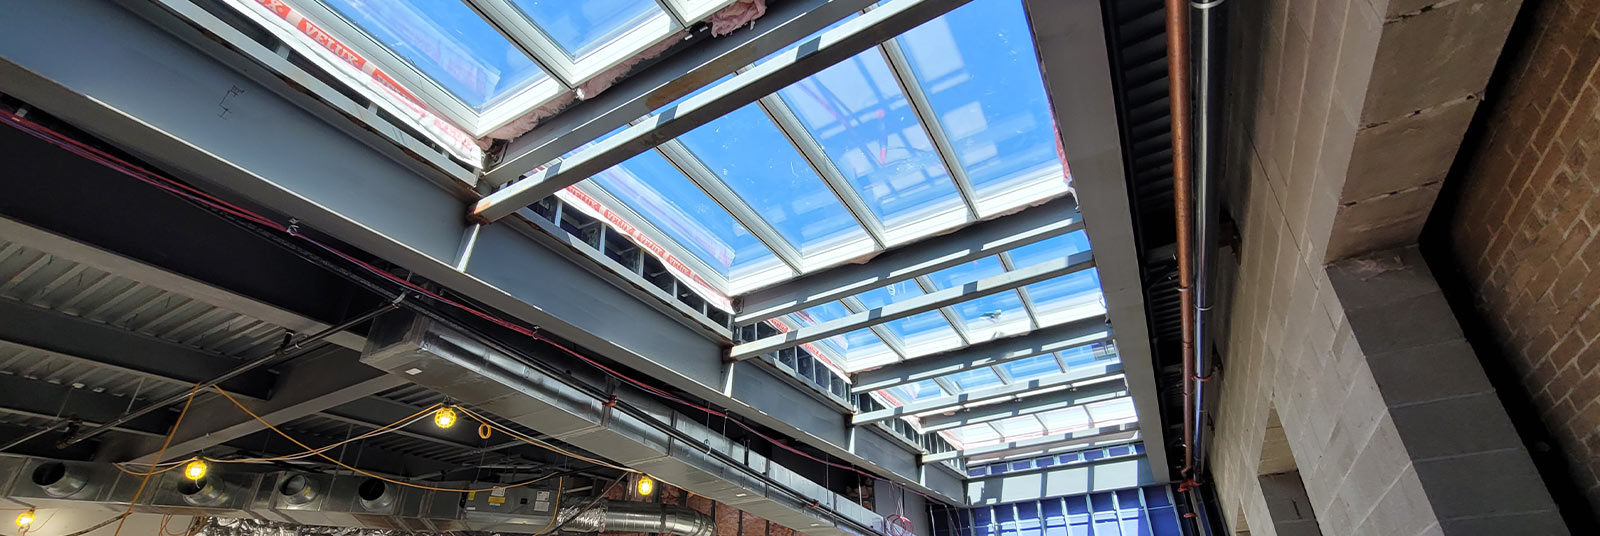 Skylight construction in the new St. Charles Convocation Center.